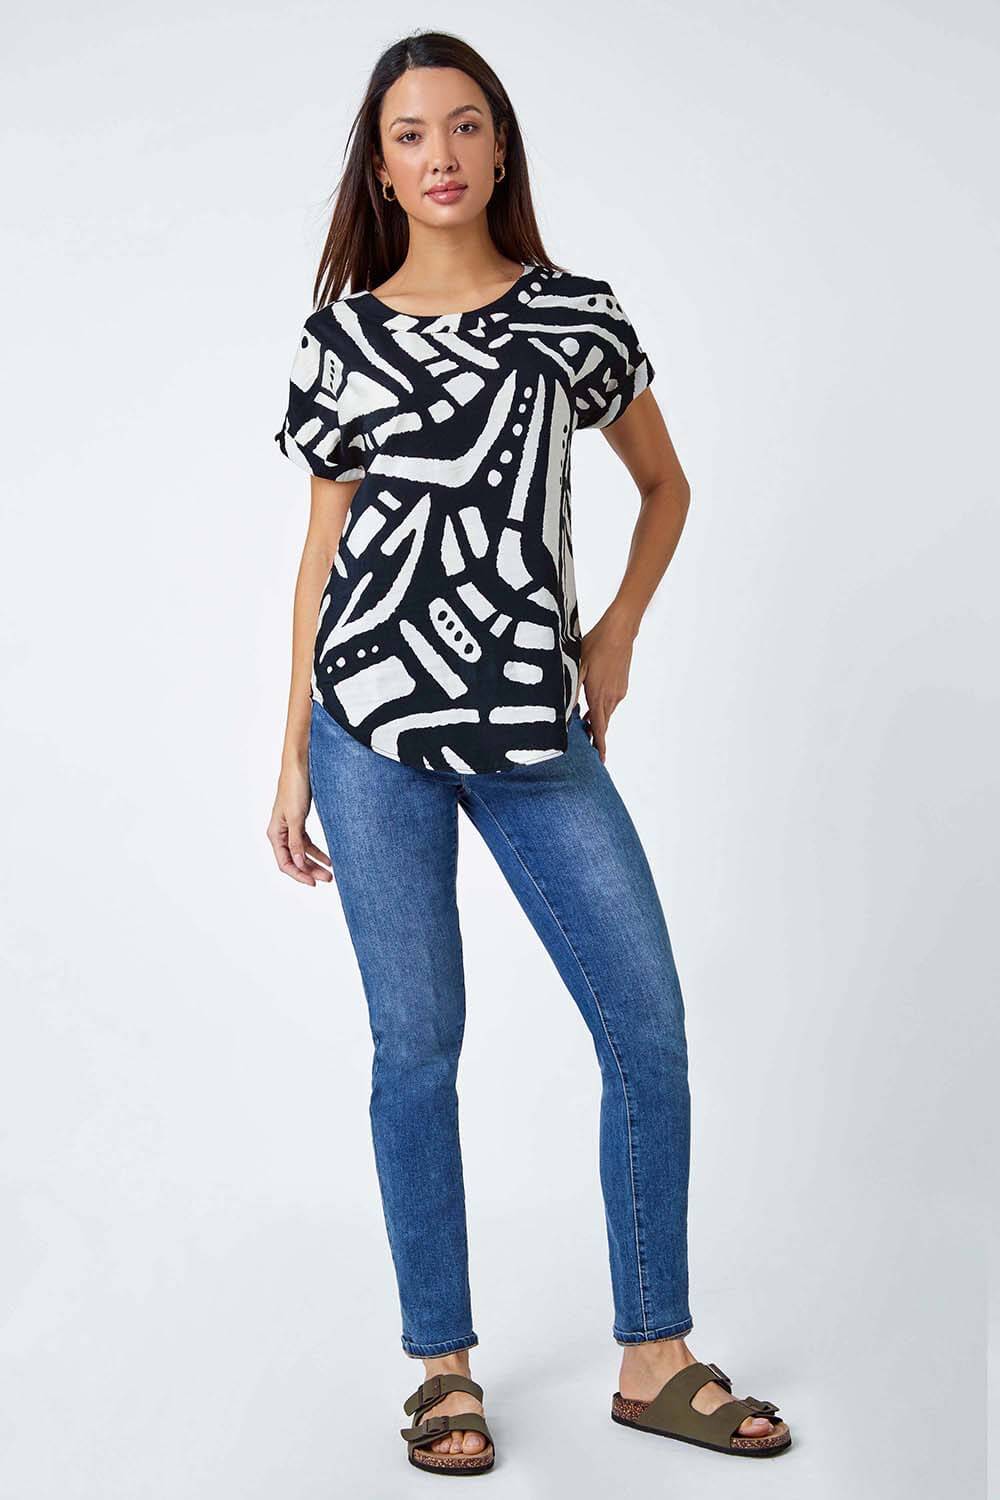 Black Contrast Abstract Print Top, Image 2 of 5